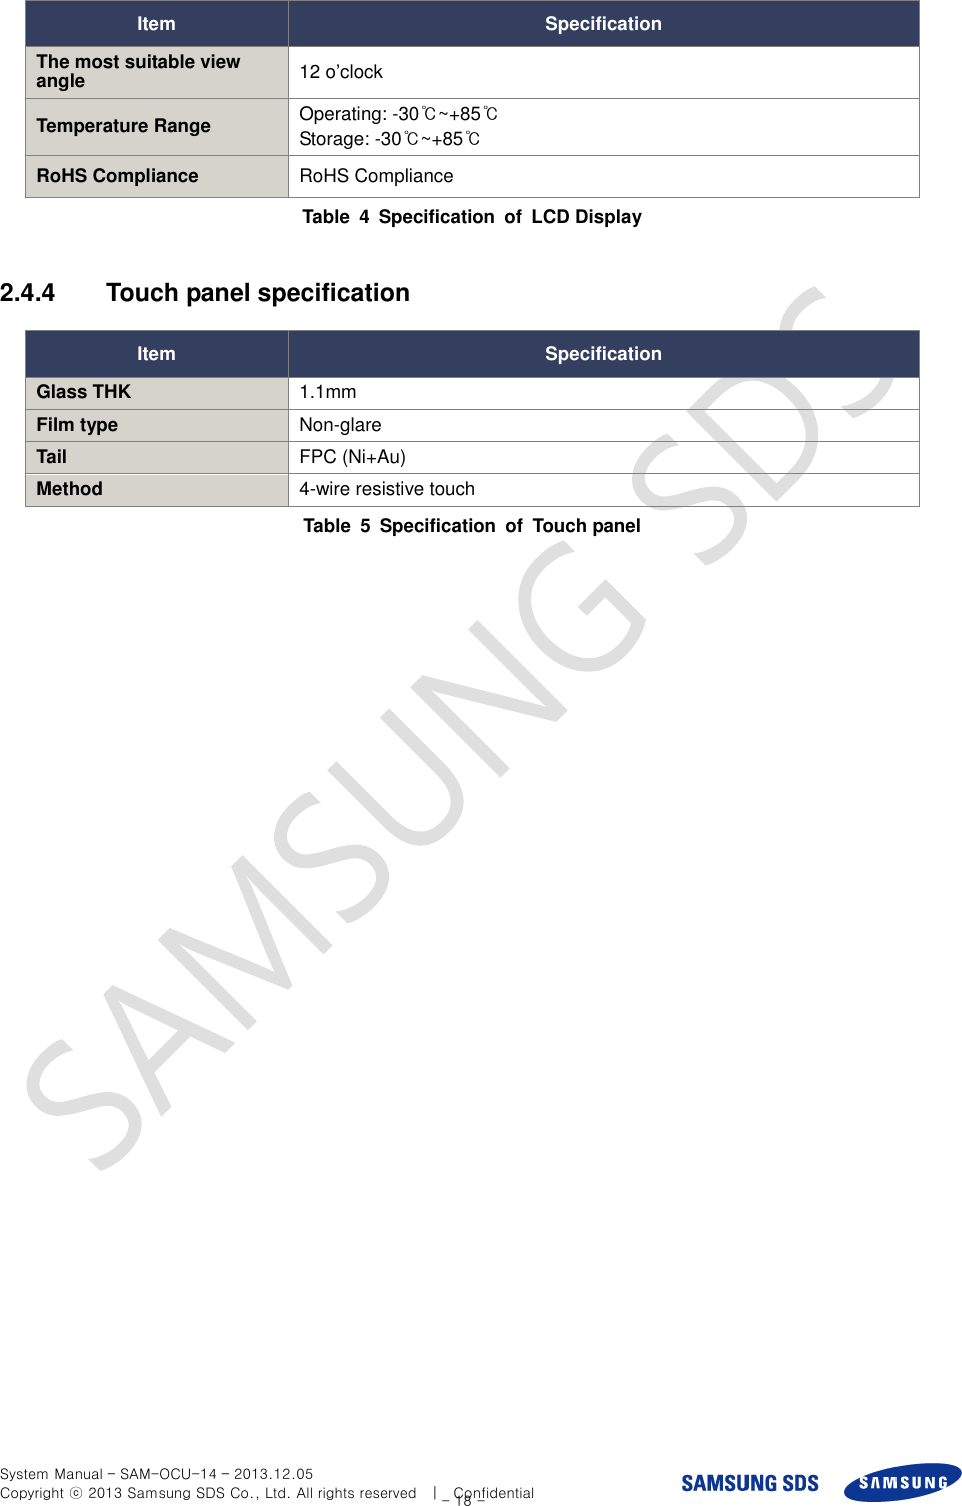  System Manual – SAM-OCU-14 – 2013.12.05 Copyright ⓒ 2013 Samsung SDS Co., Ltd. All rights reserved    |    Confidential - 18 - Item Specification The most suitable view angle 12 o’clock Temperature Range Operating: -30℃~+85℃ Storage: -30℃~+85℃ RoHS Compliance RoHS Compliance Table  4  Specification  of  LCD Display  2.4.4  Touch panel specification Item Specification Glass THK 1.1mm Film type Non-glare Tail FPC (Ni+Au) Method 4-wire resistive touch Table  5  Specification  of  Touch panel  